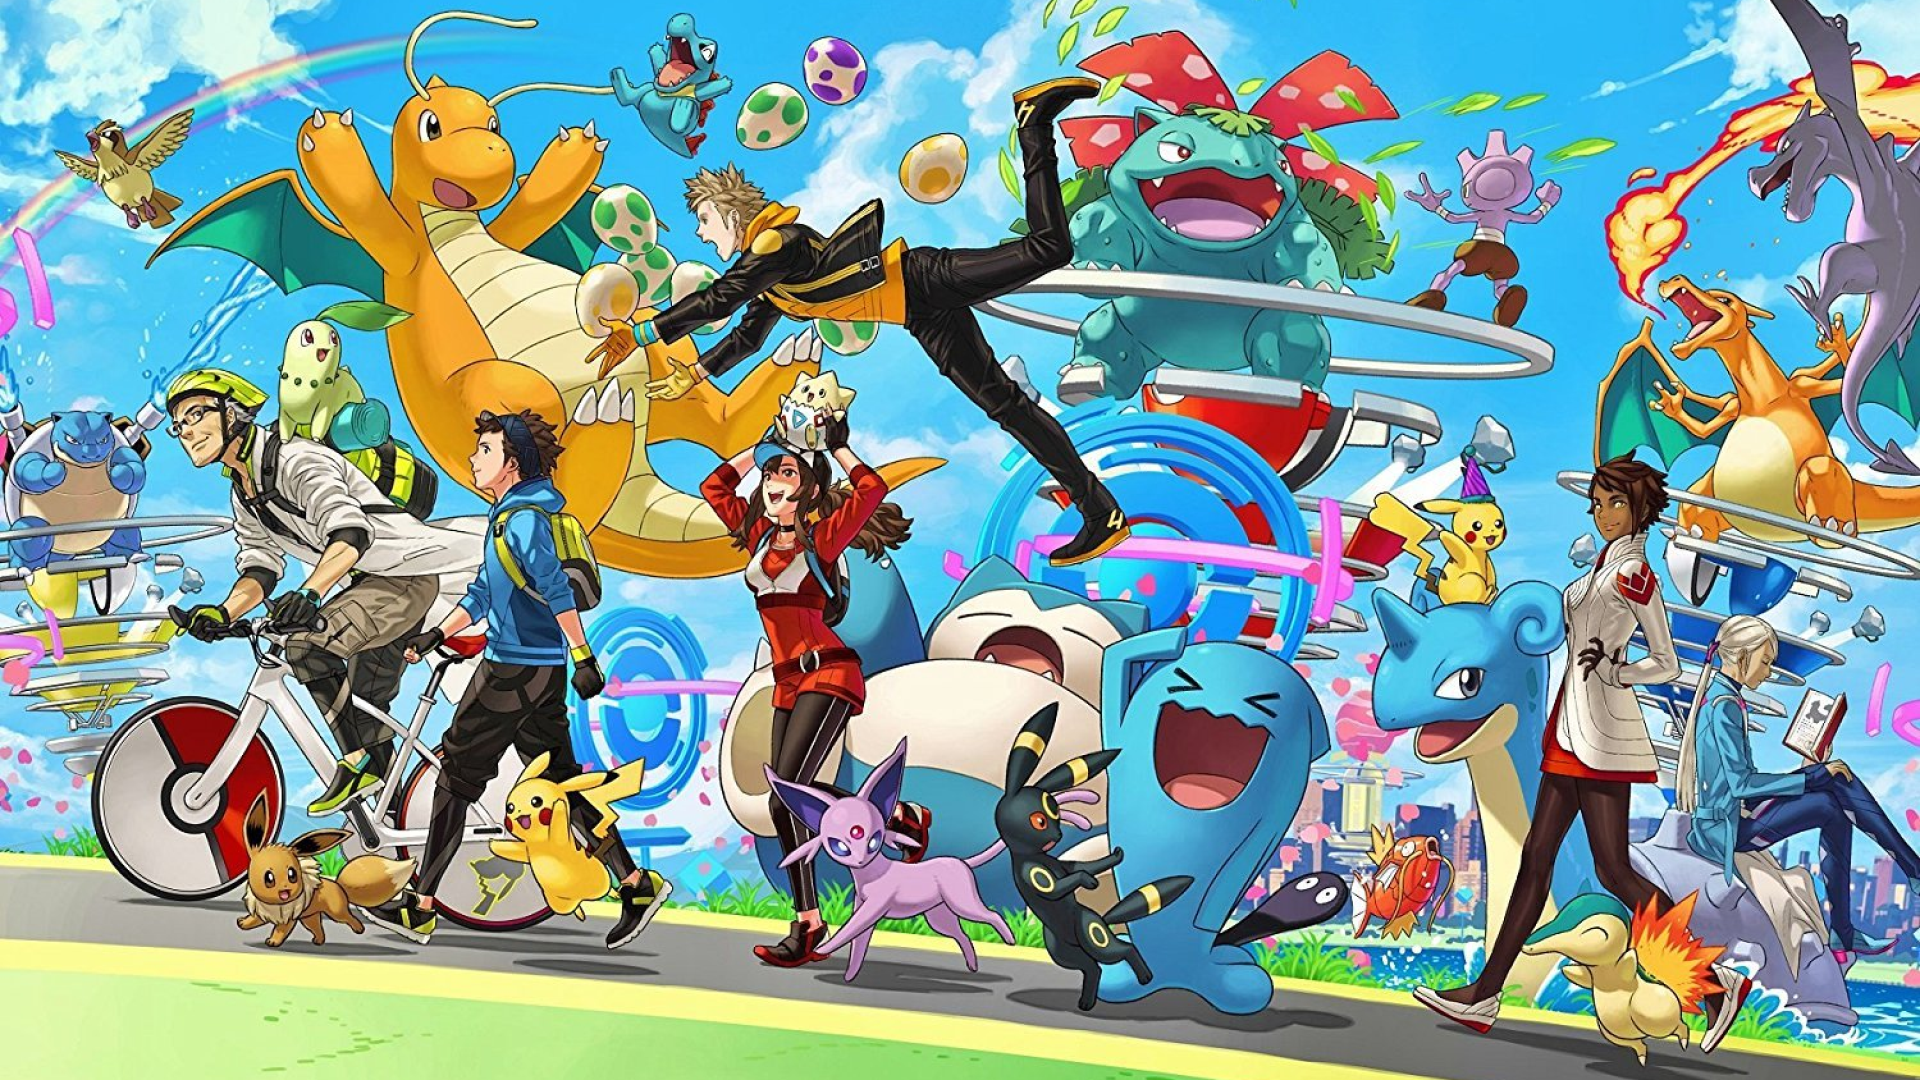 Image for Pokémon GO-themed TCG expansion’s card art will portray the critters in the real world